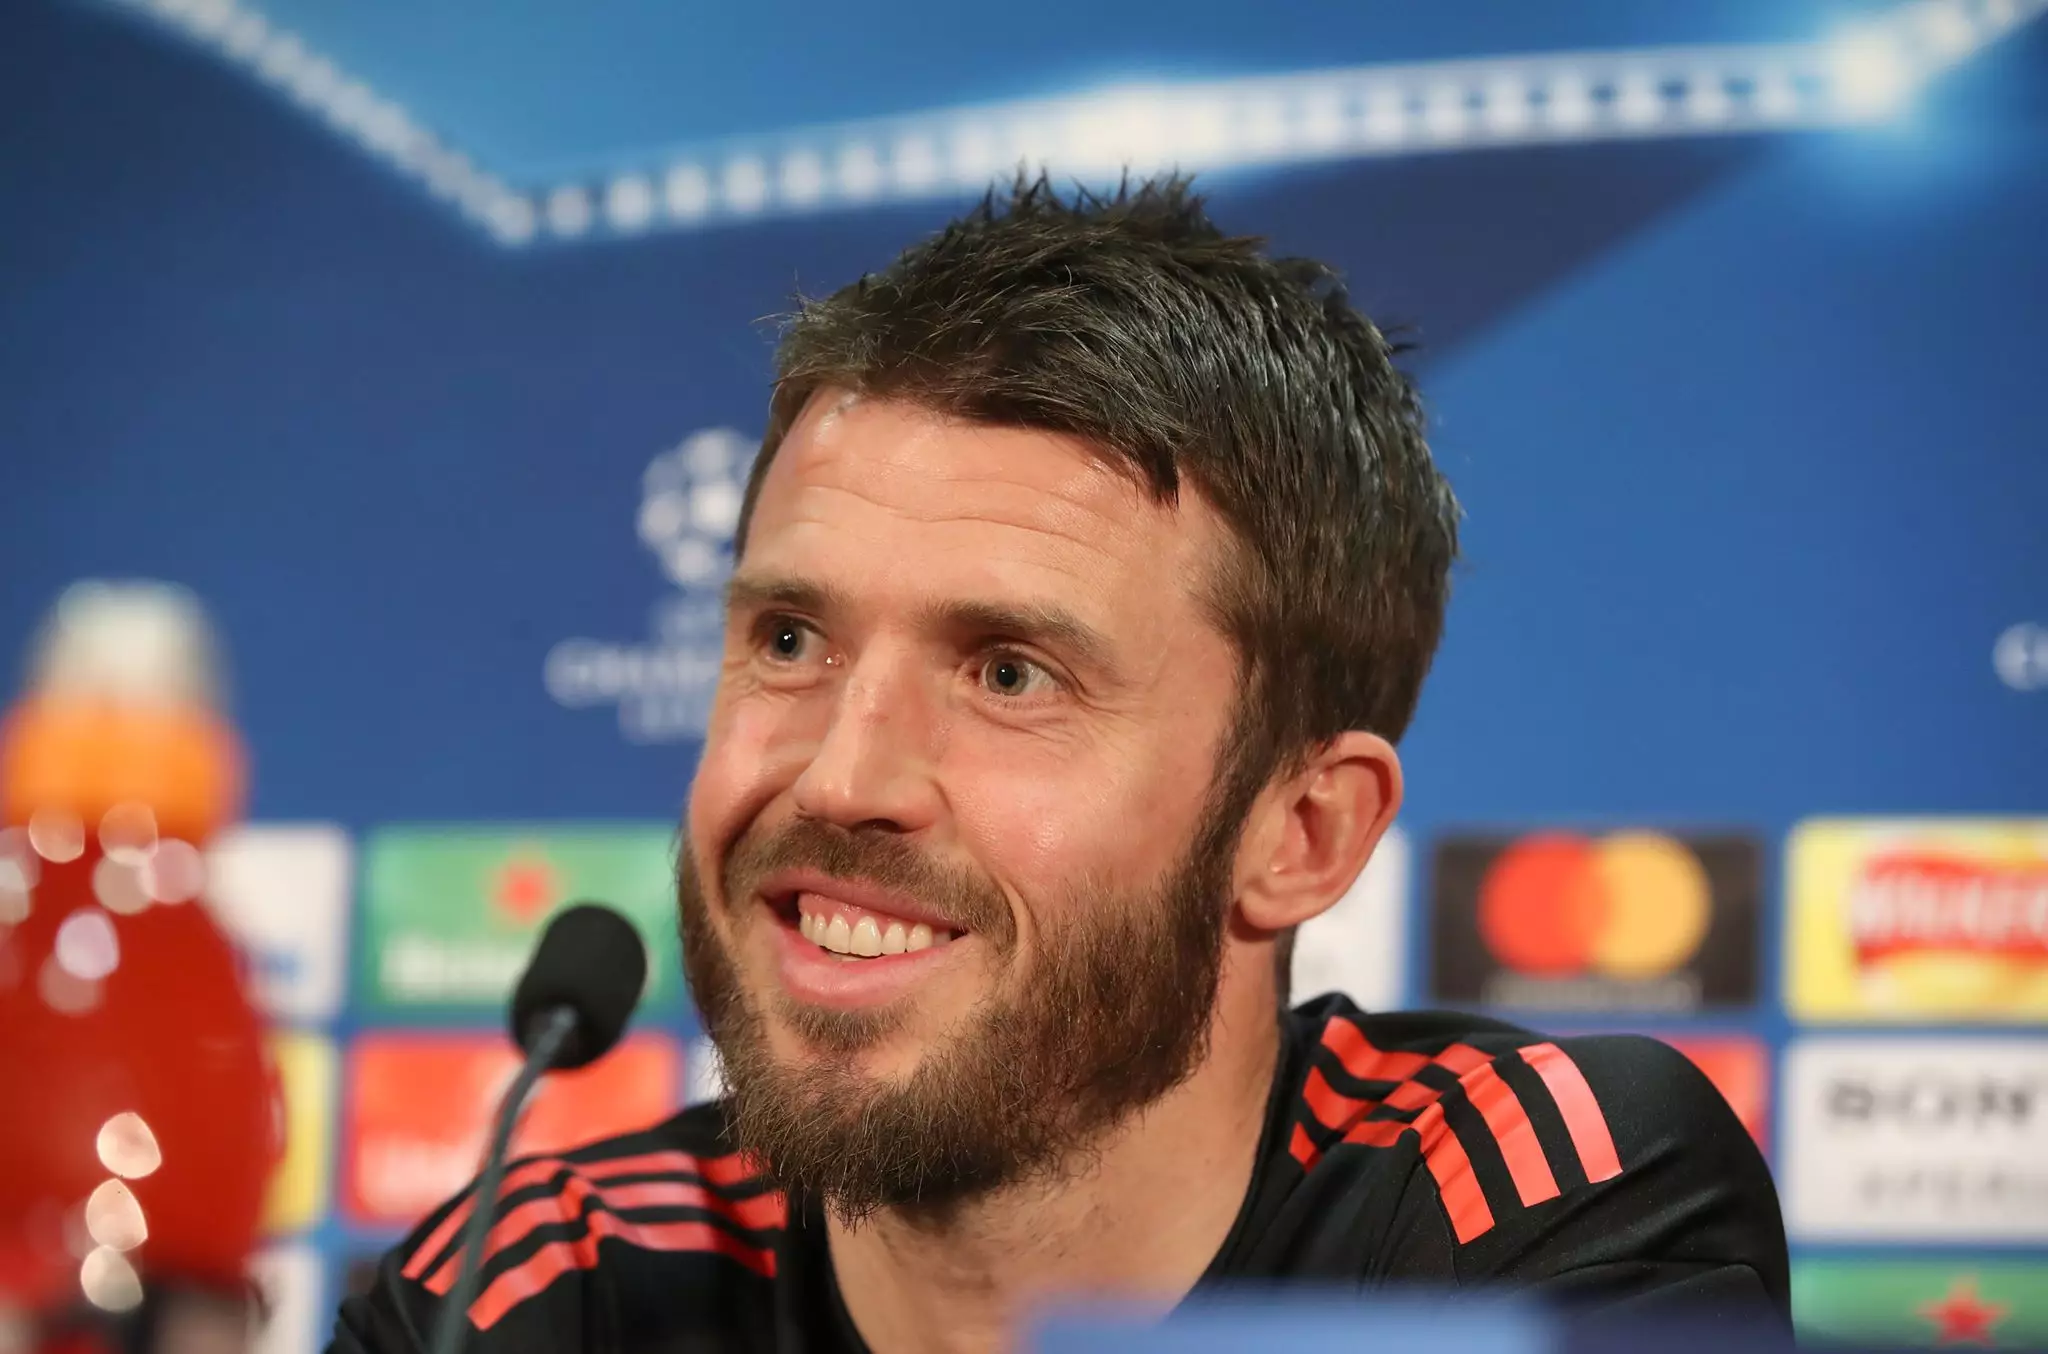 Carrick is set to end his playing career this summer. Image: PA Images.